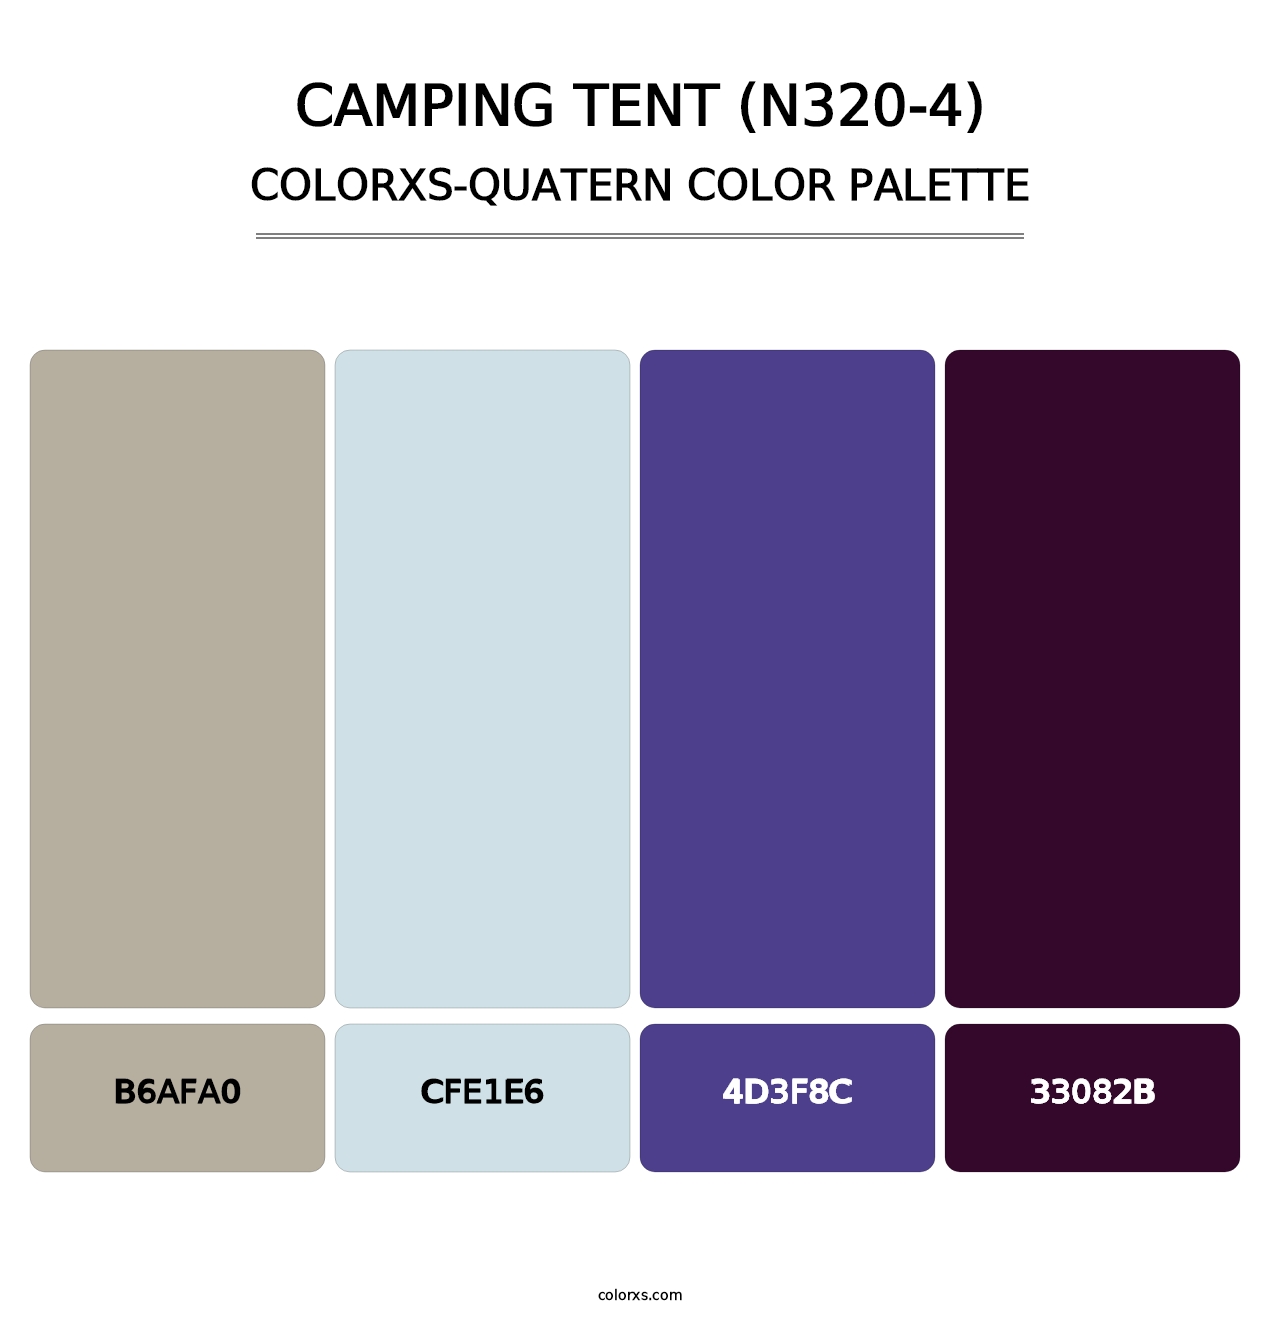 Camping Tent (N320-4) - Colorxs Quatern Palette